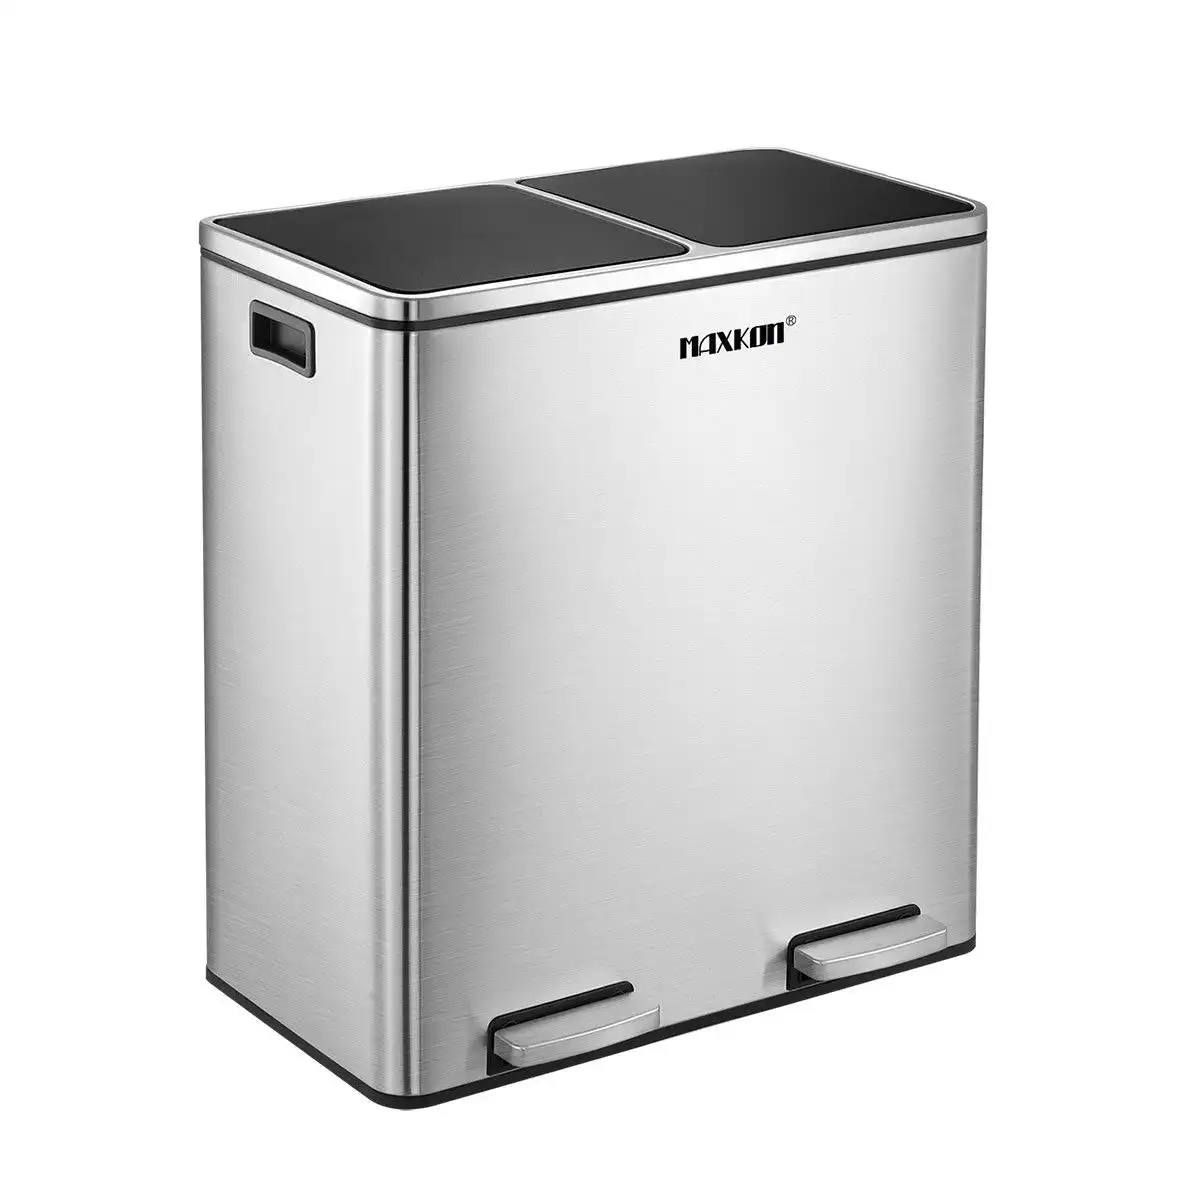 Maxkon 60L Dual Compartment Dustbin Stainless Steel Kitchen Garbage Rubbish Bin with Pedals